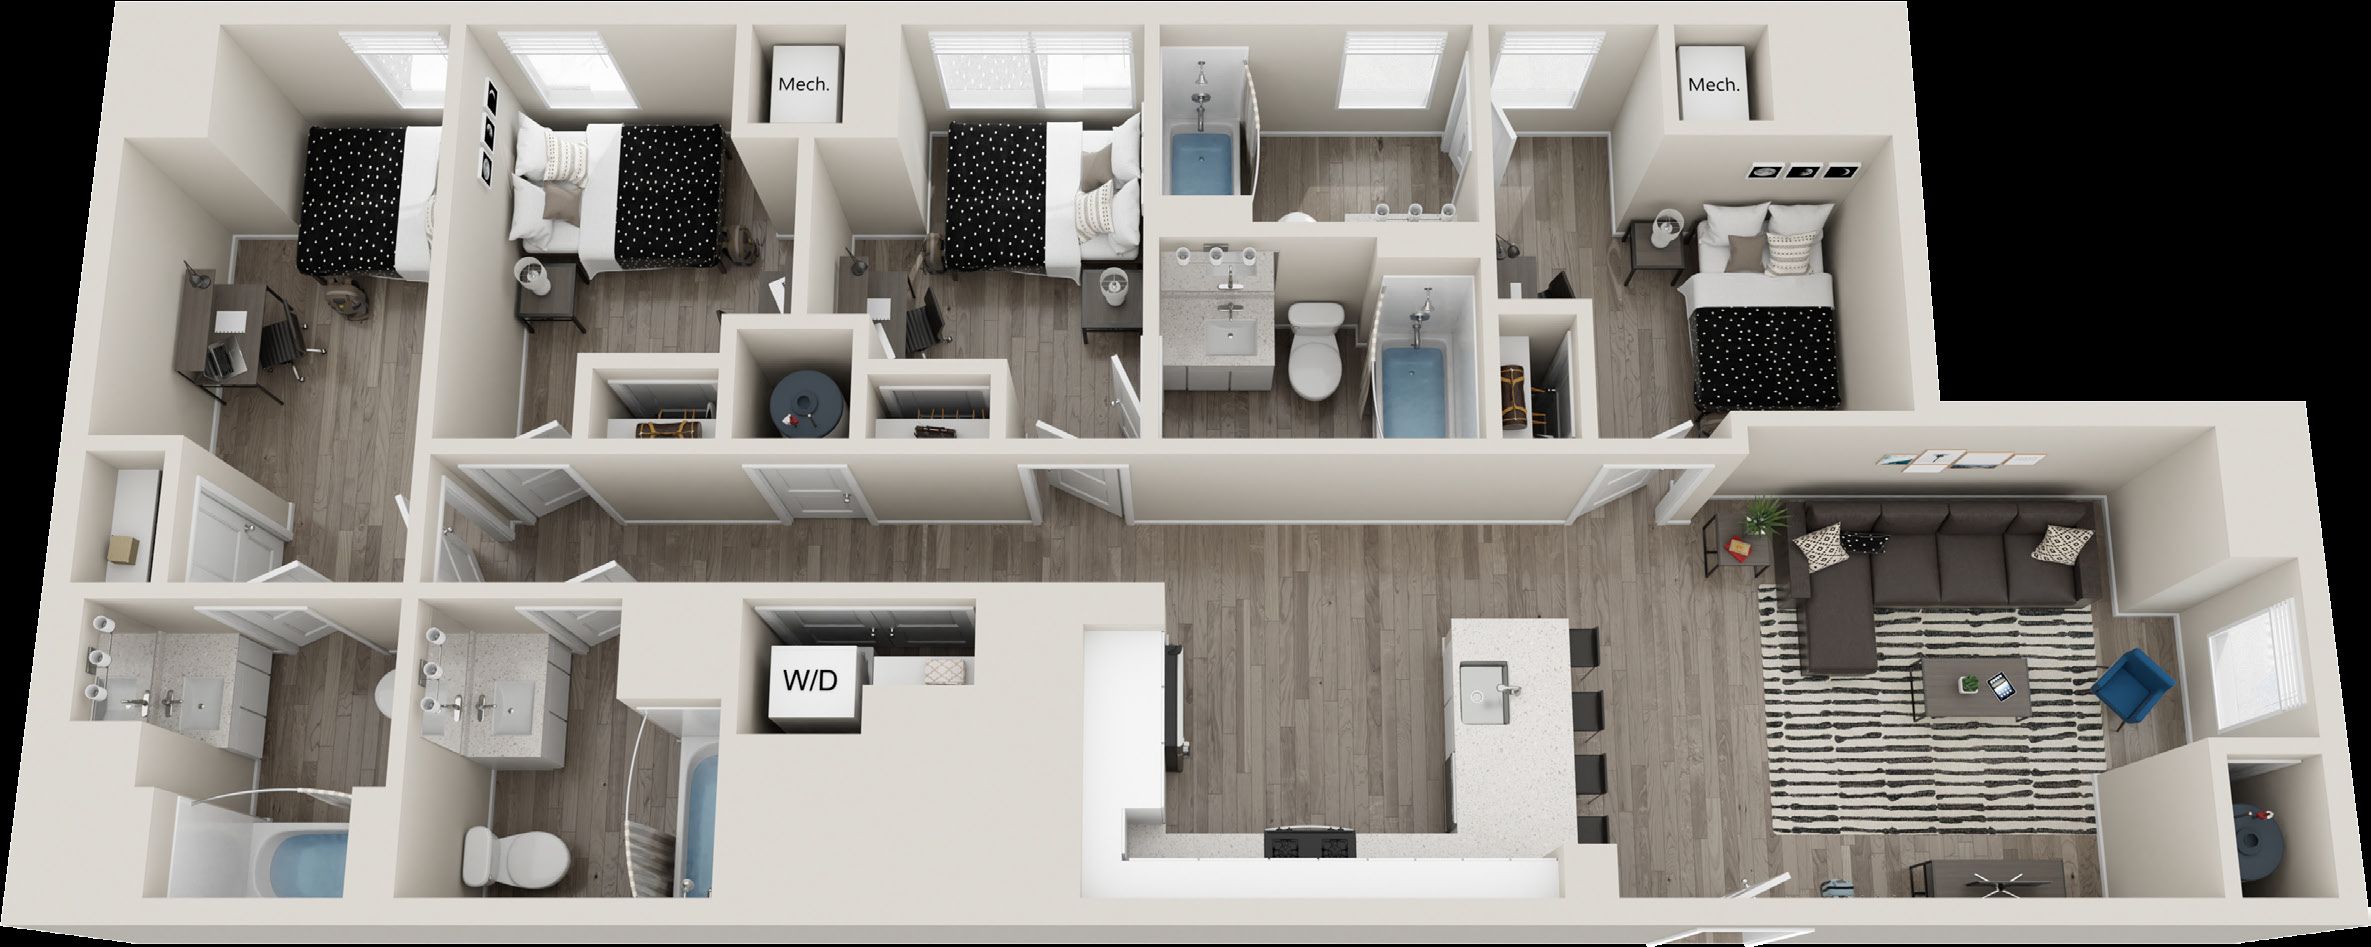 The Standard at Philadelphia at 119 South 31st Street. Floor plan of a four-bedroom apartment of type Dawson. Credit: Landmark Properties